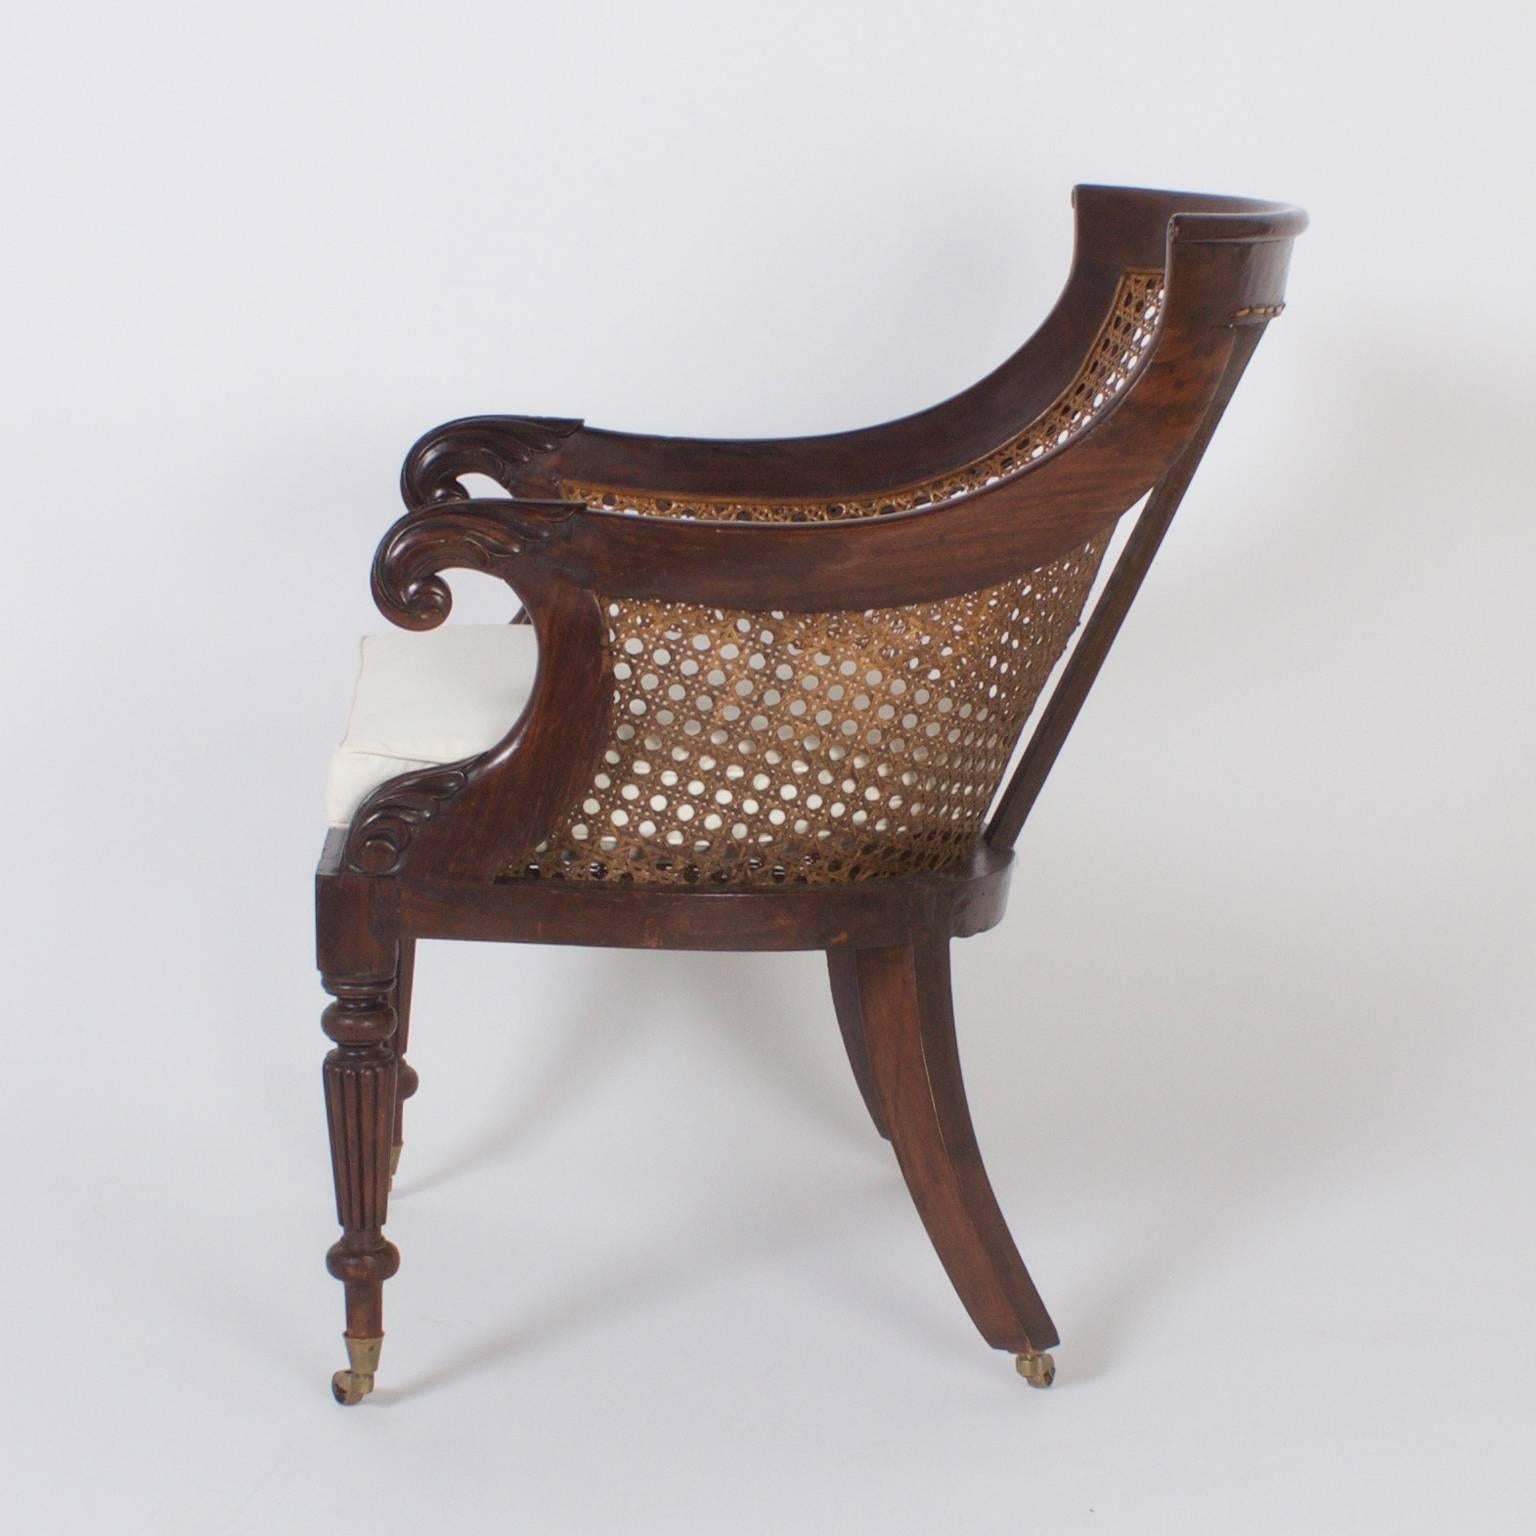 English Pair of Regency Style Cane Library Chairs